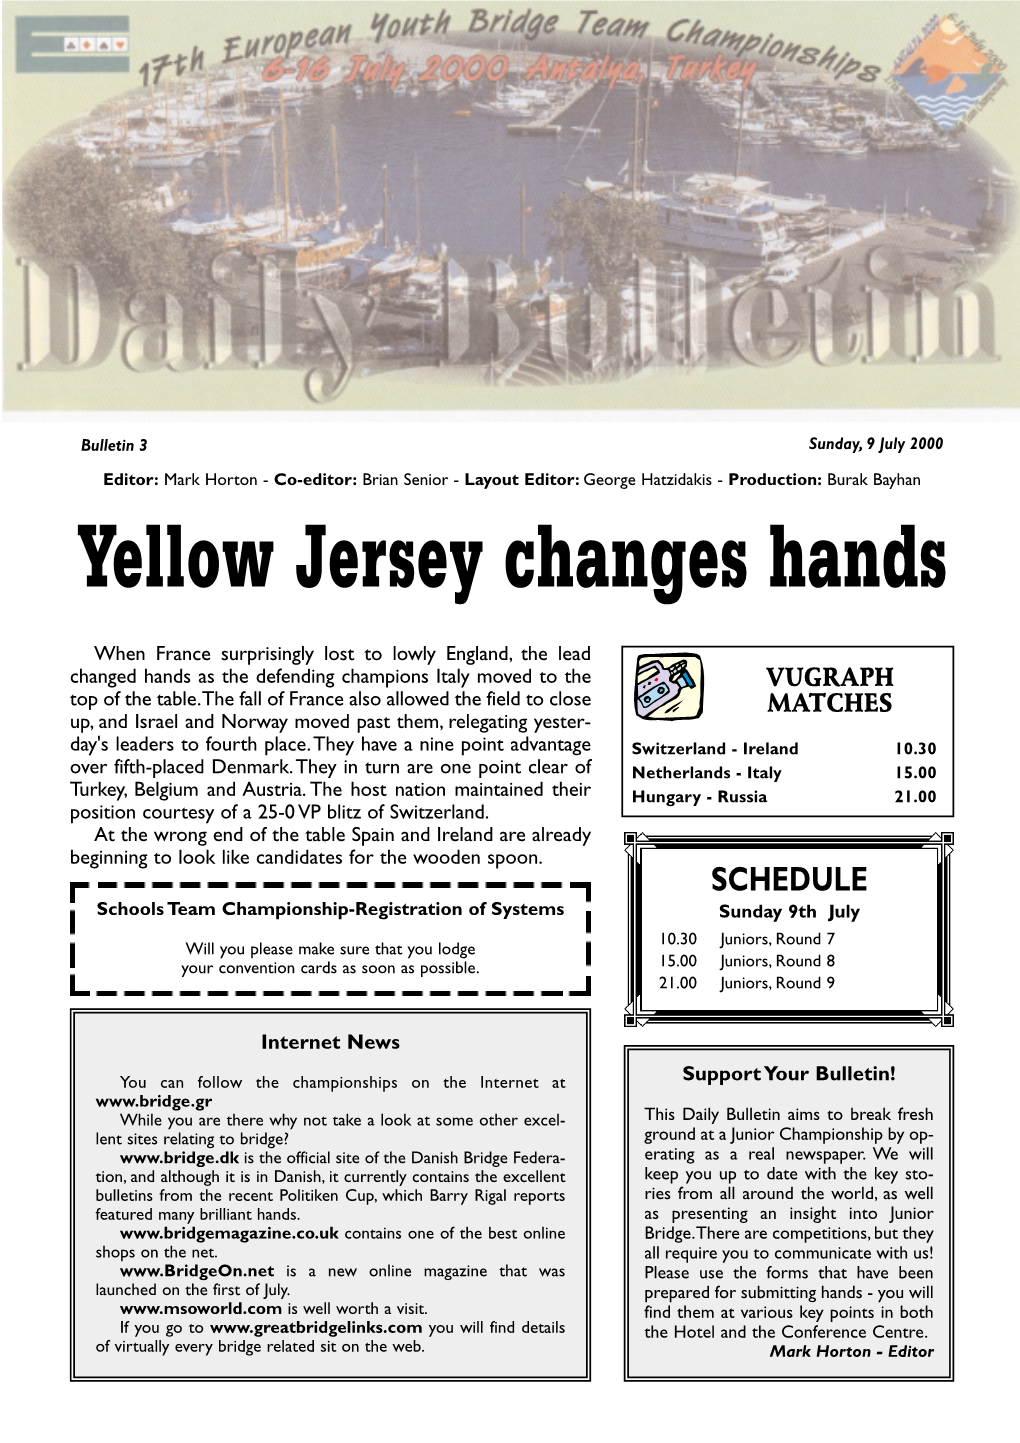 Yellow Jersey Changes Hands